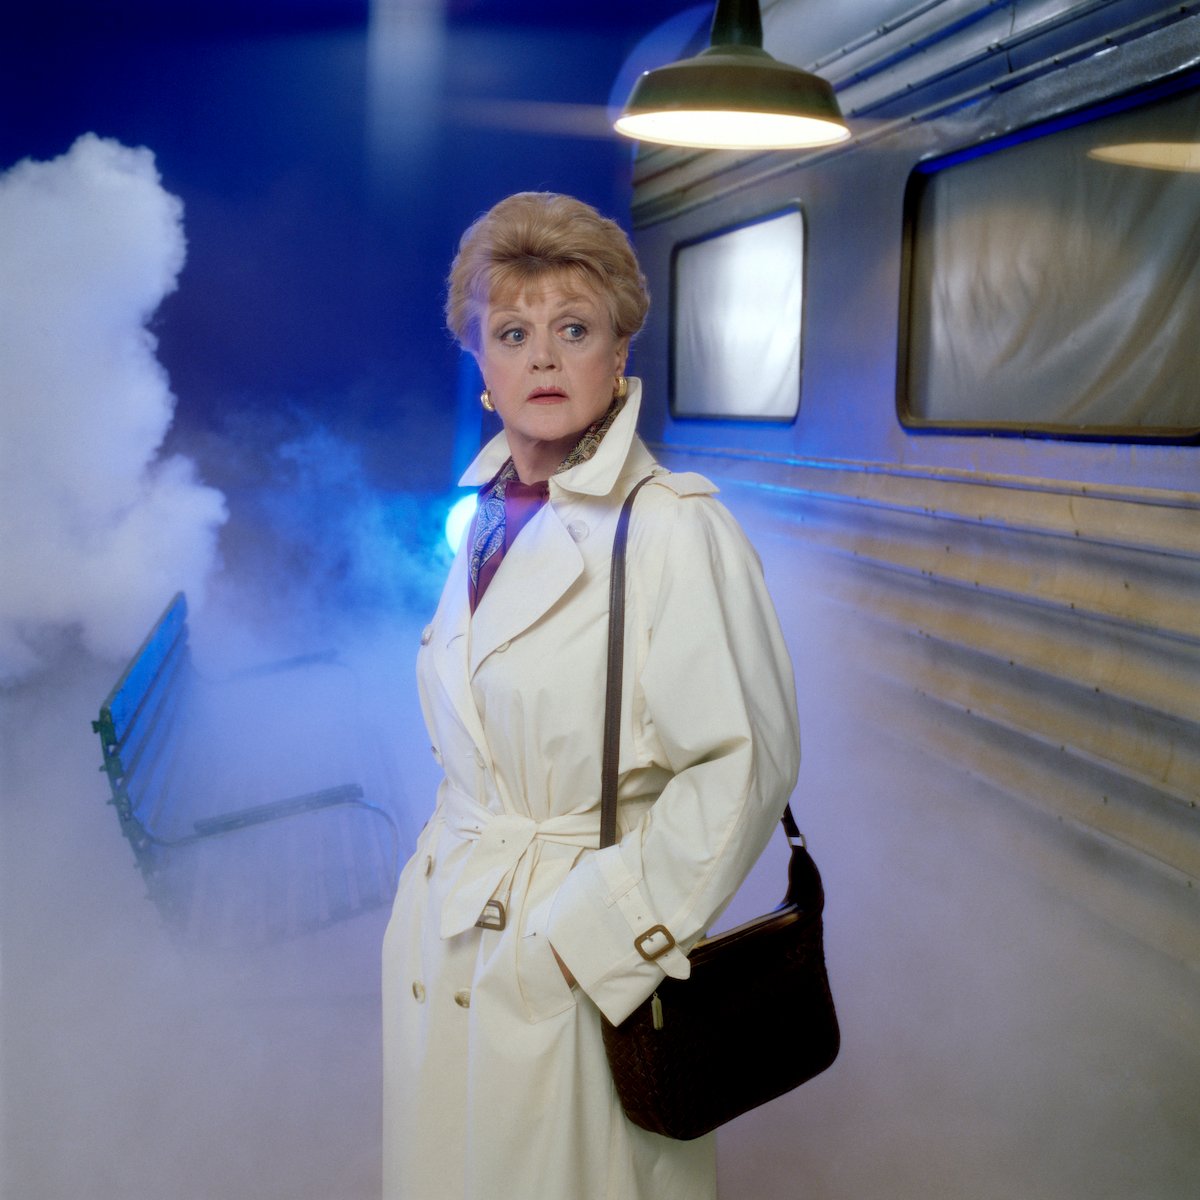 Angela Lansbury as Jessica Fletcher wearing a trench coat in a promotional shot for 'Murder, She Wrote'